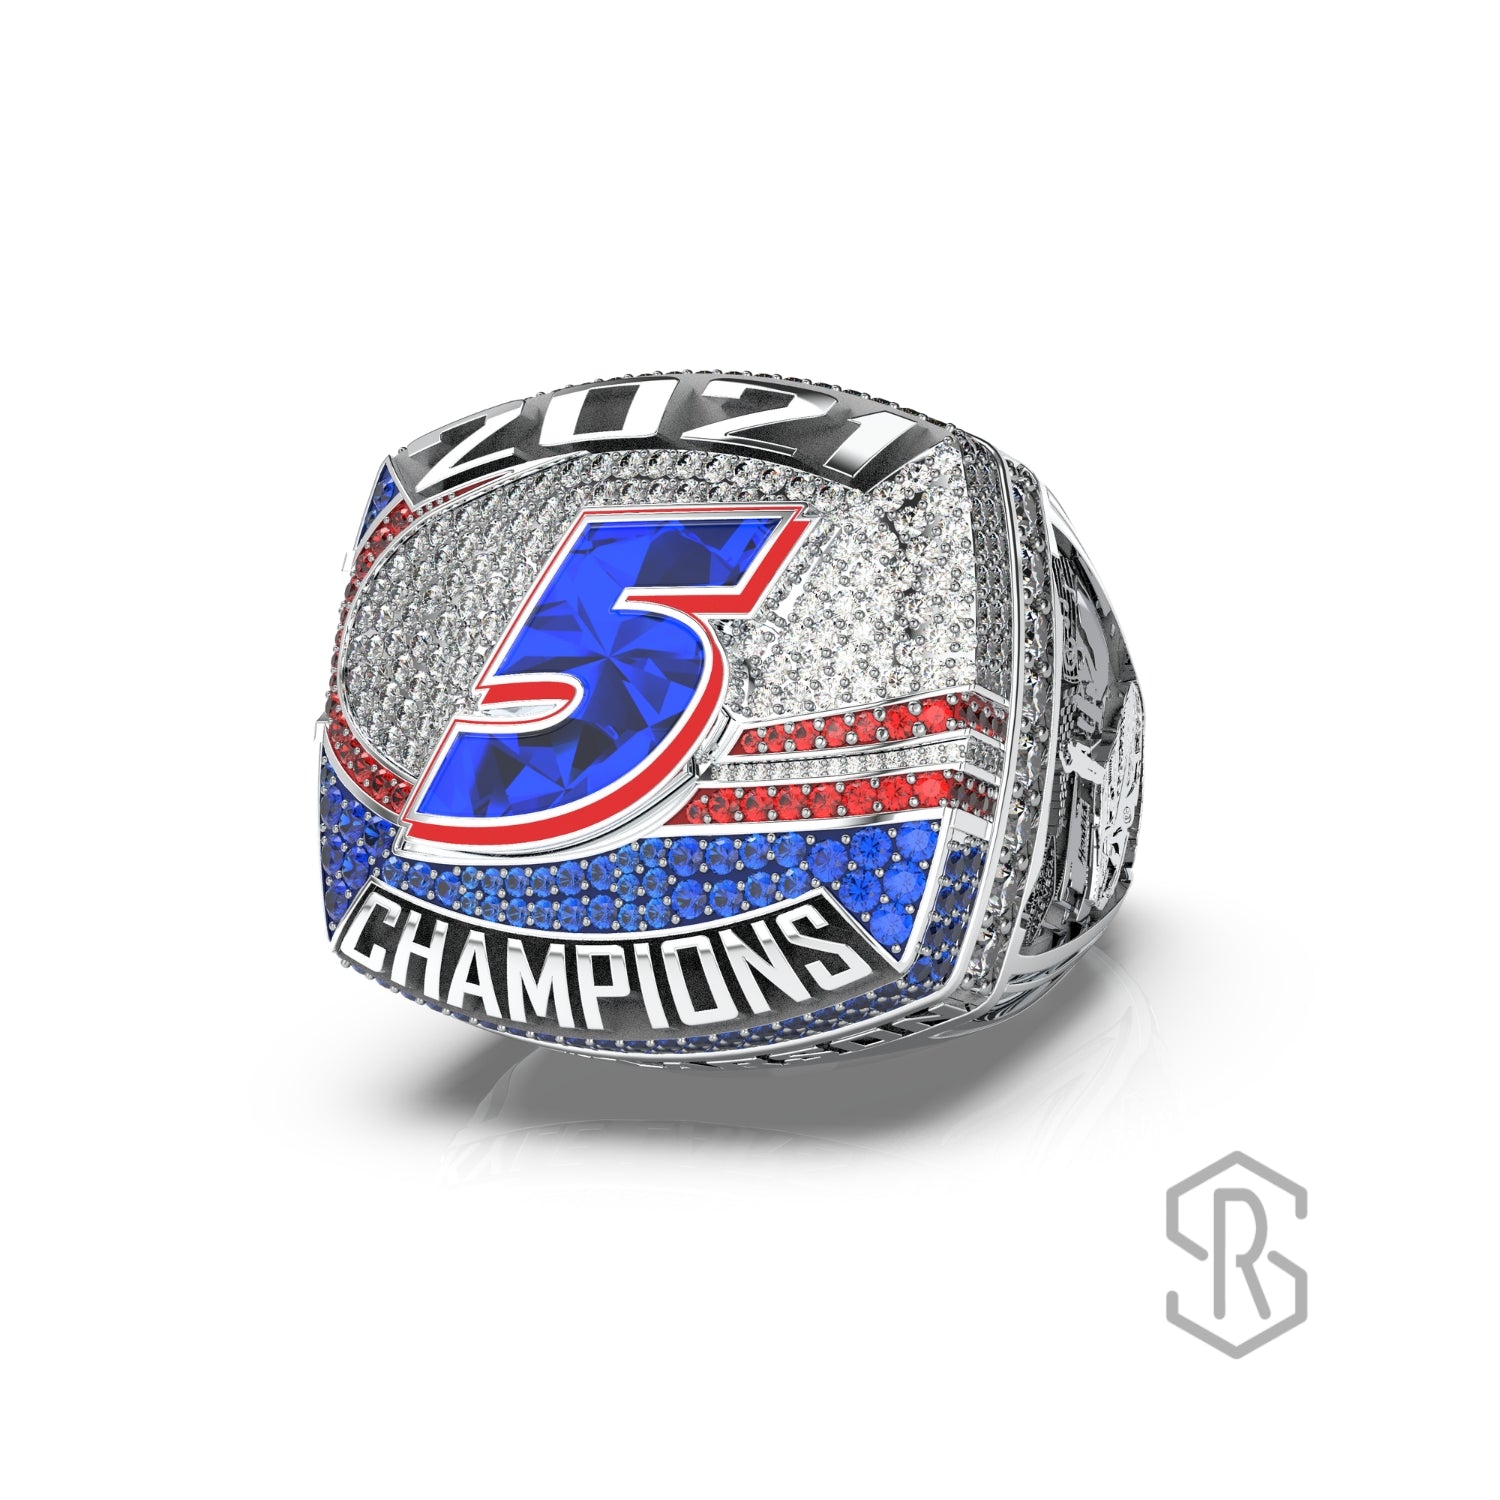 EMPLOYEES ONLY - Hendrick Motorsports - Kyle Larson Cup Series Championship Ring - 2021